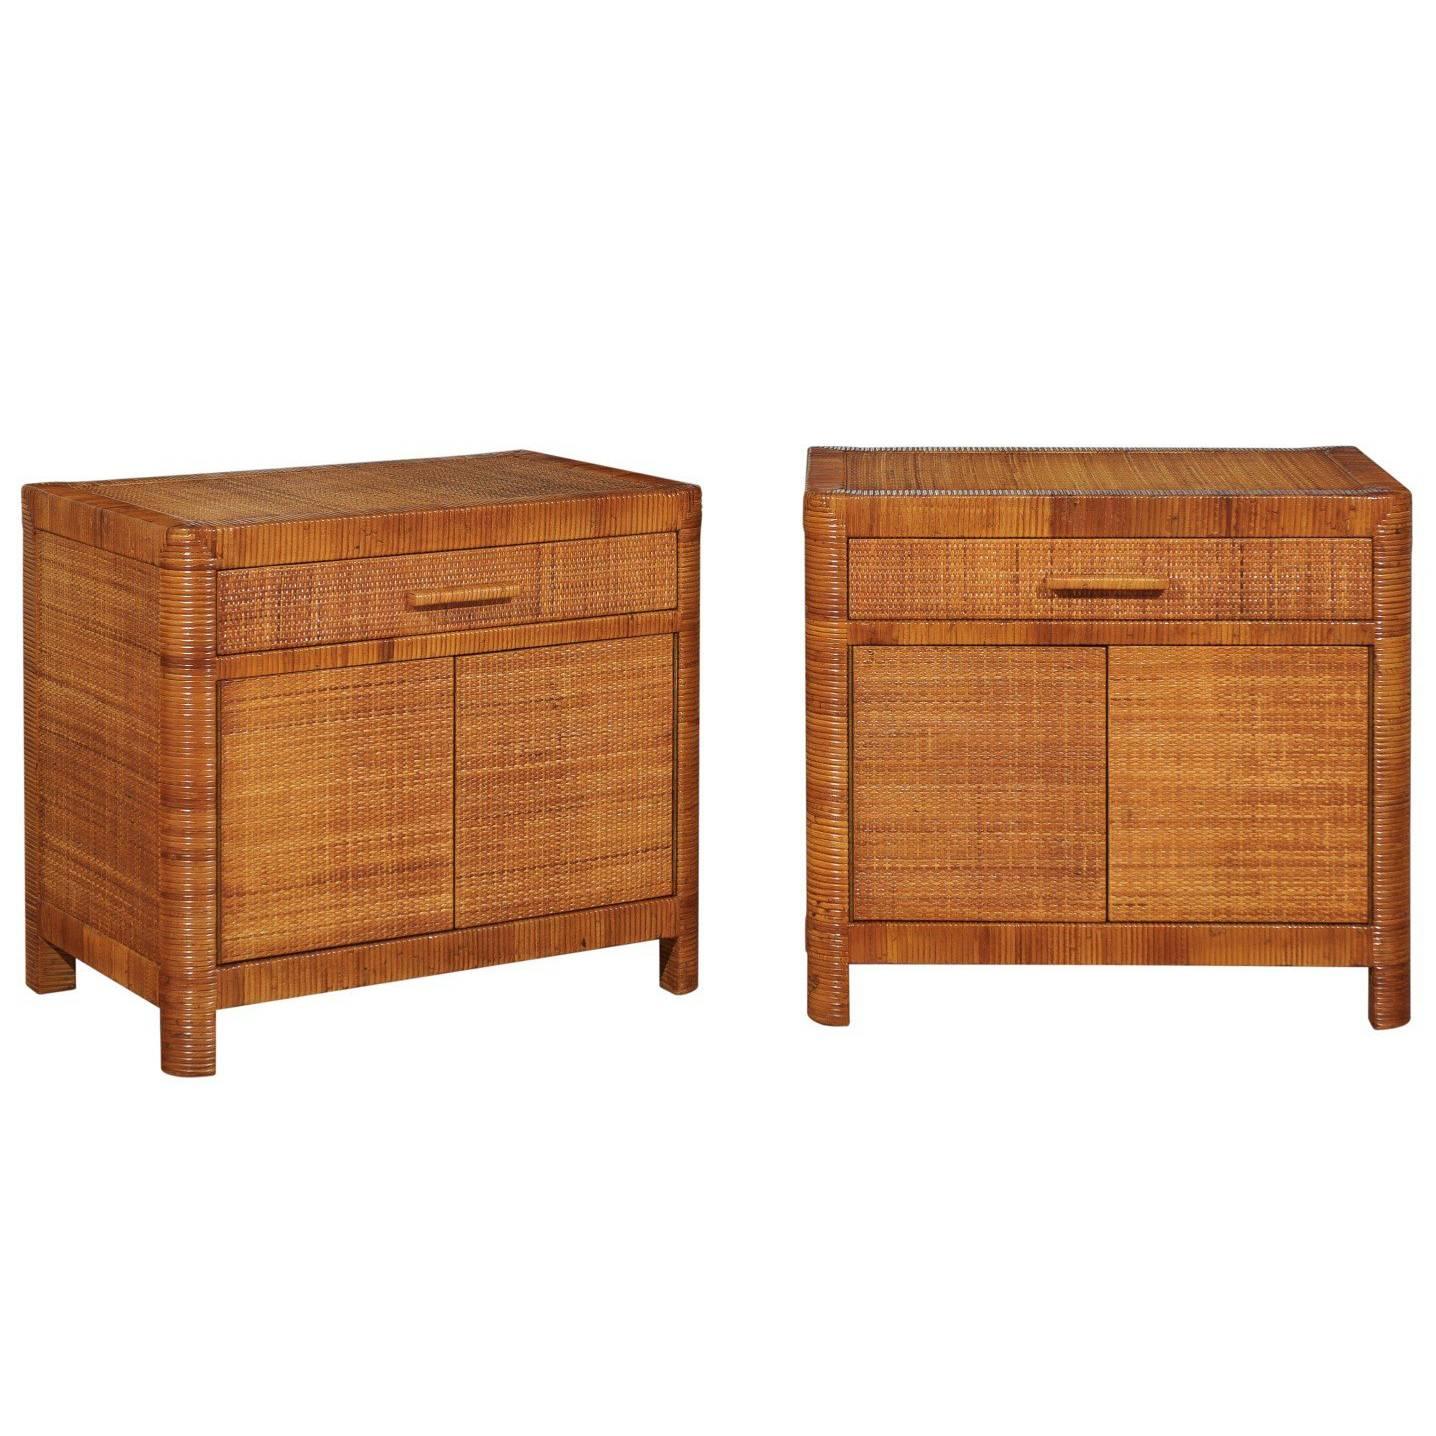 Beautiful Restored Pair of Vintage Cane Cabinets by Bielecky Brothers